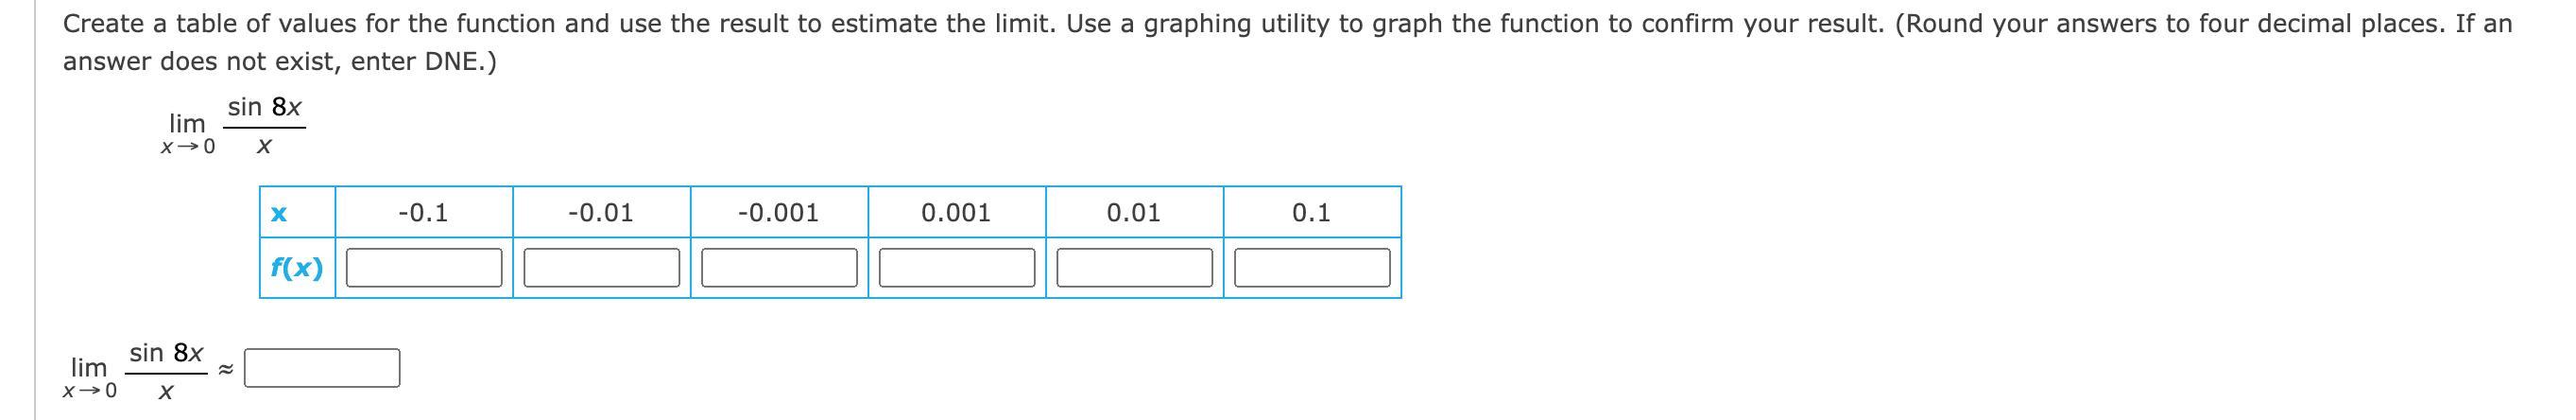 Create A Table Of Values For The Function And Use The Result To Estimate The Limit. Use A Graphing Utility